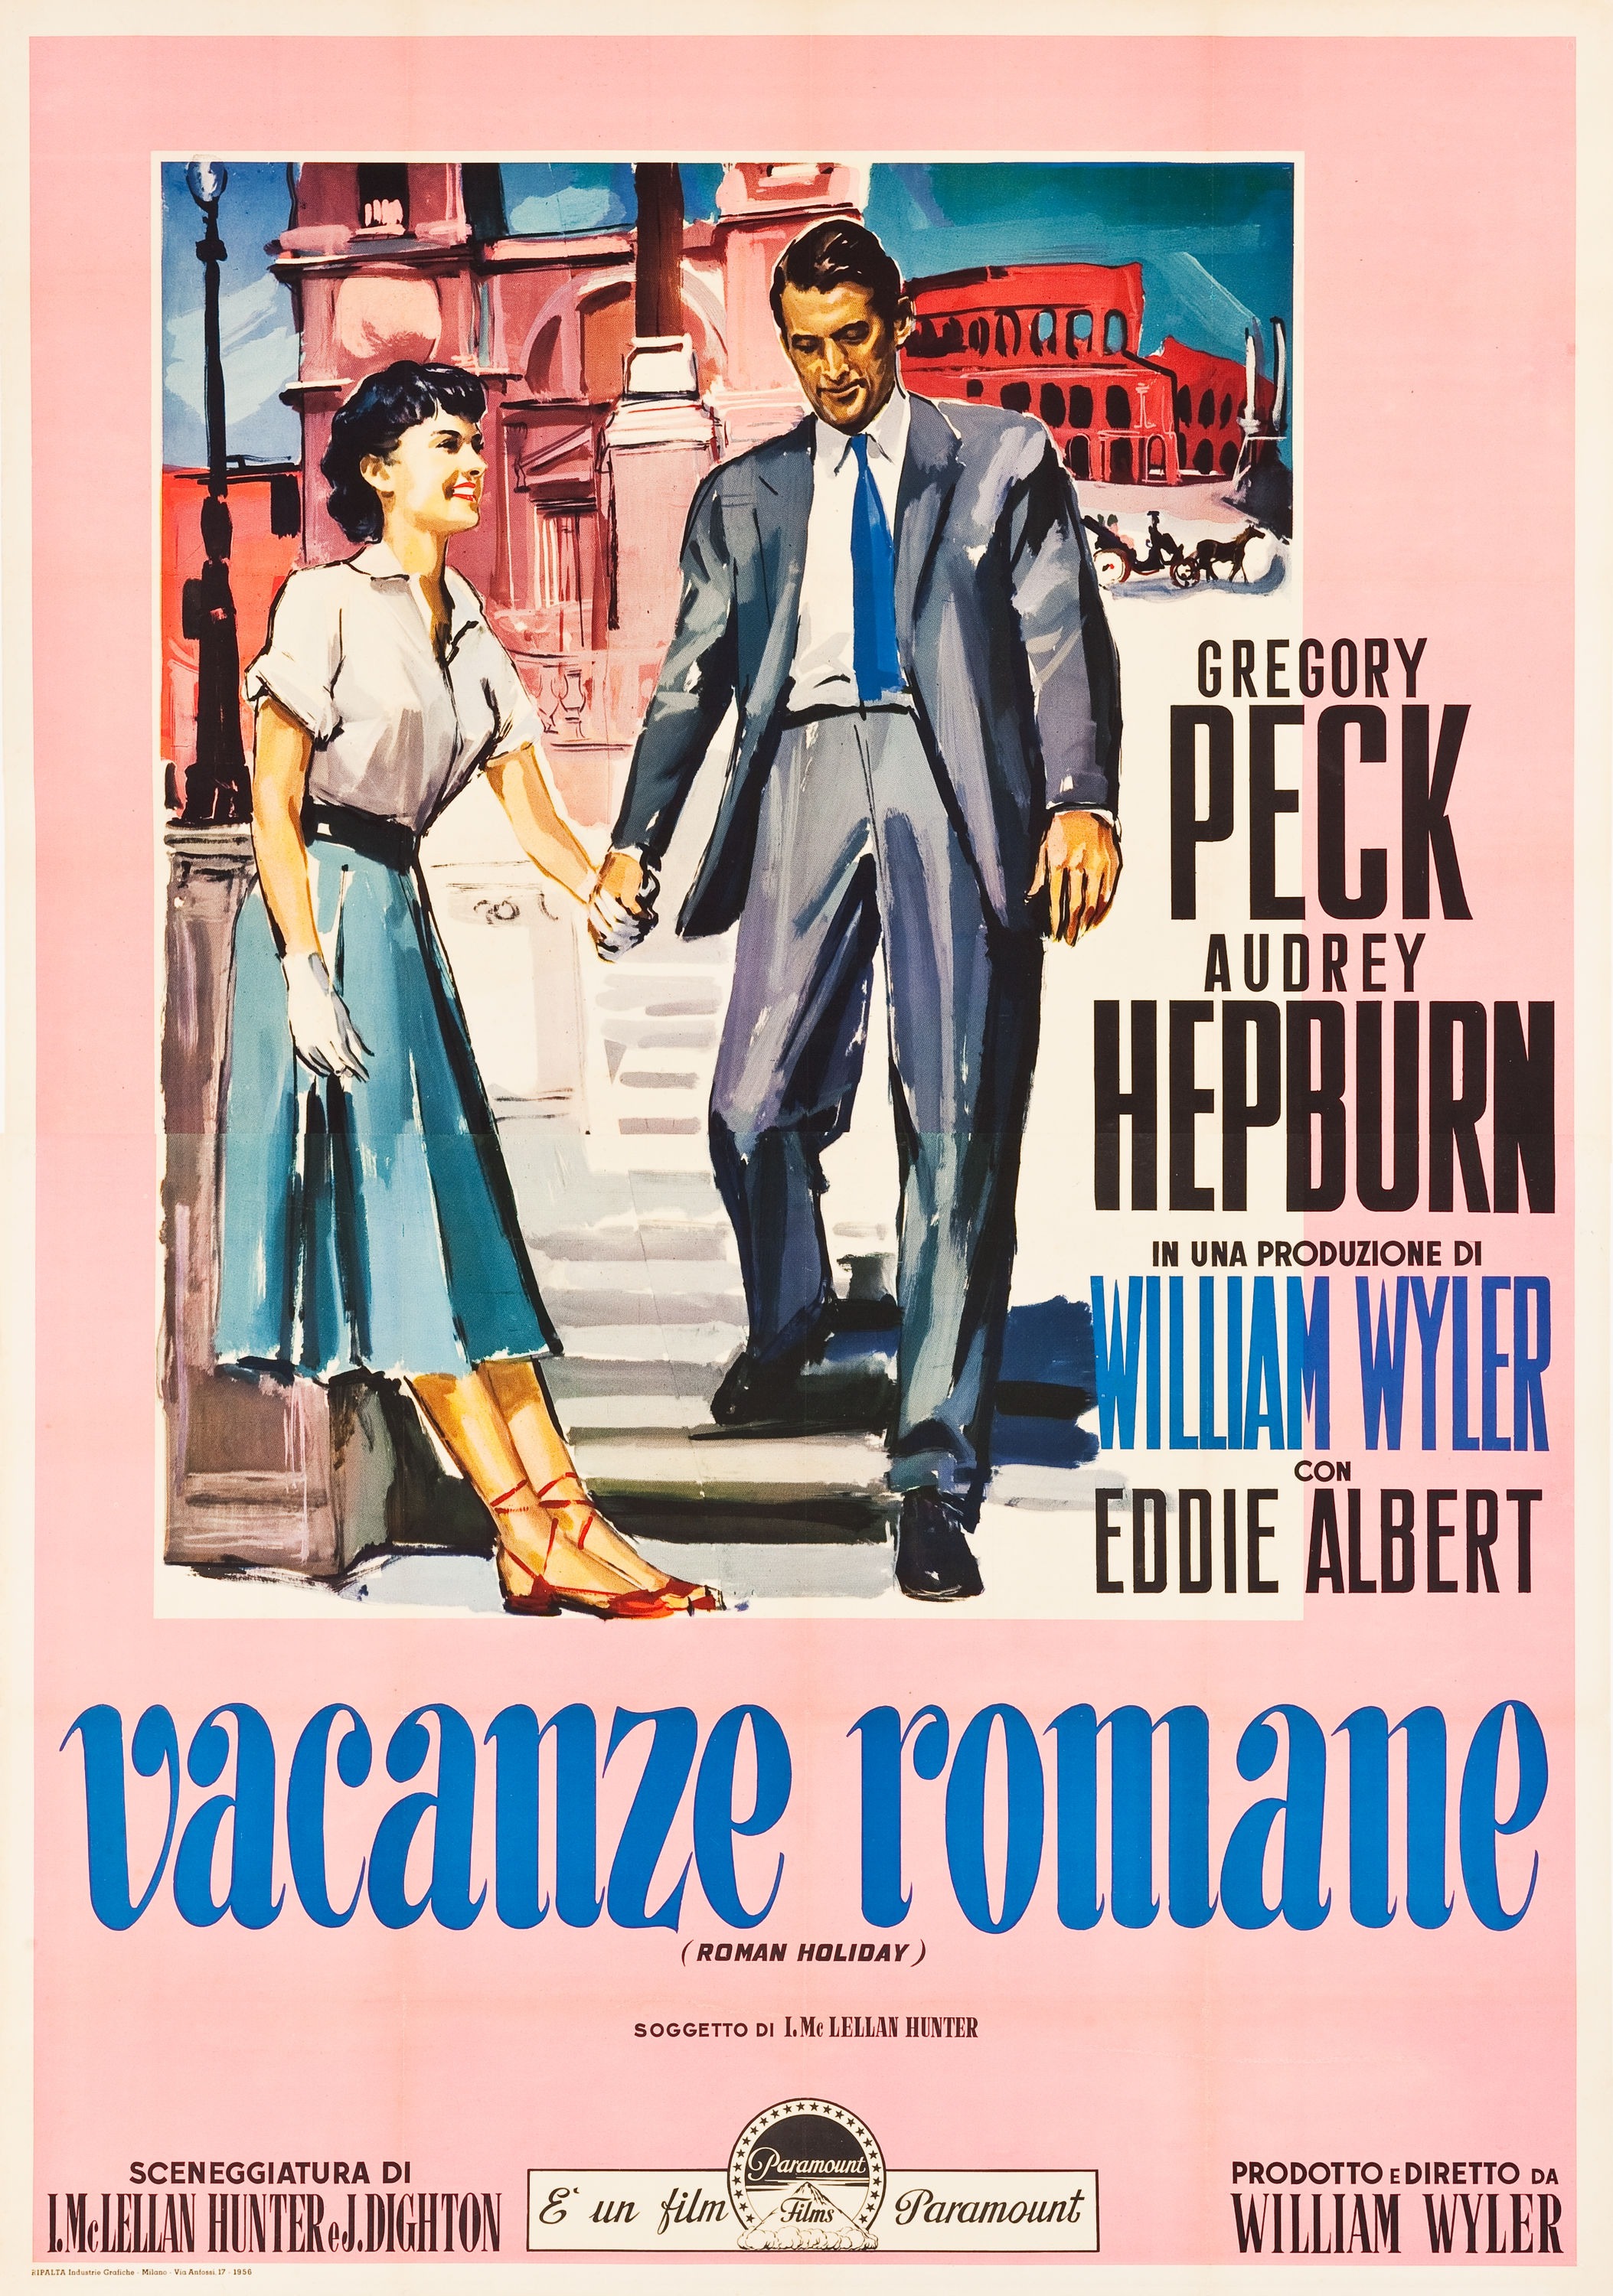 Mega Sized Movie Poster Image for Roman Holiday (#6 of 6)